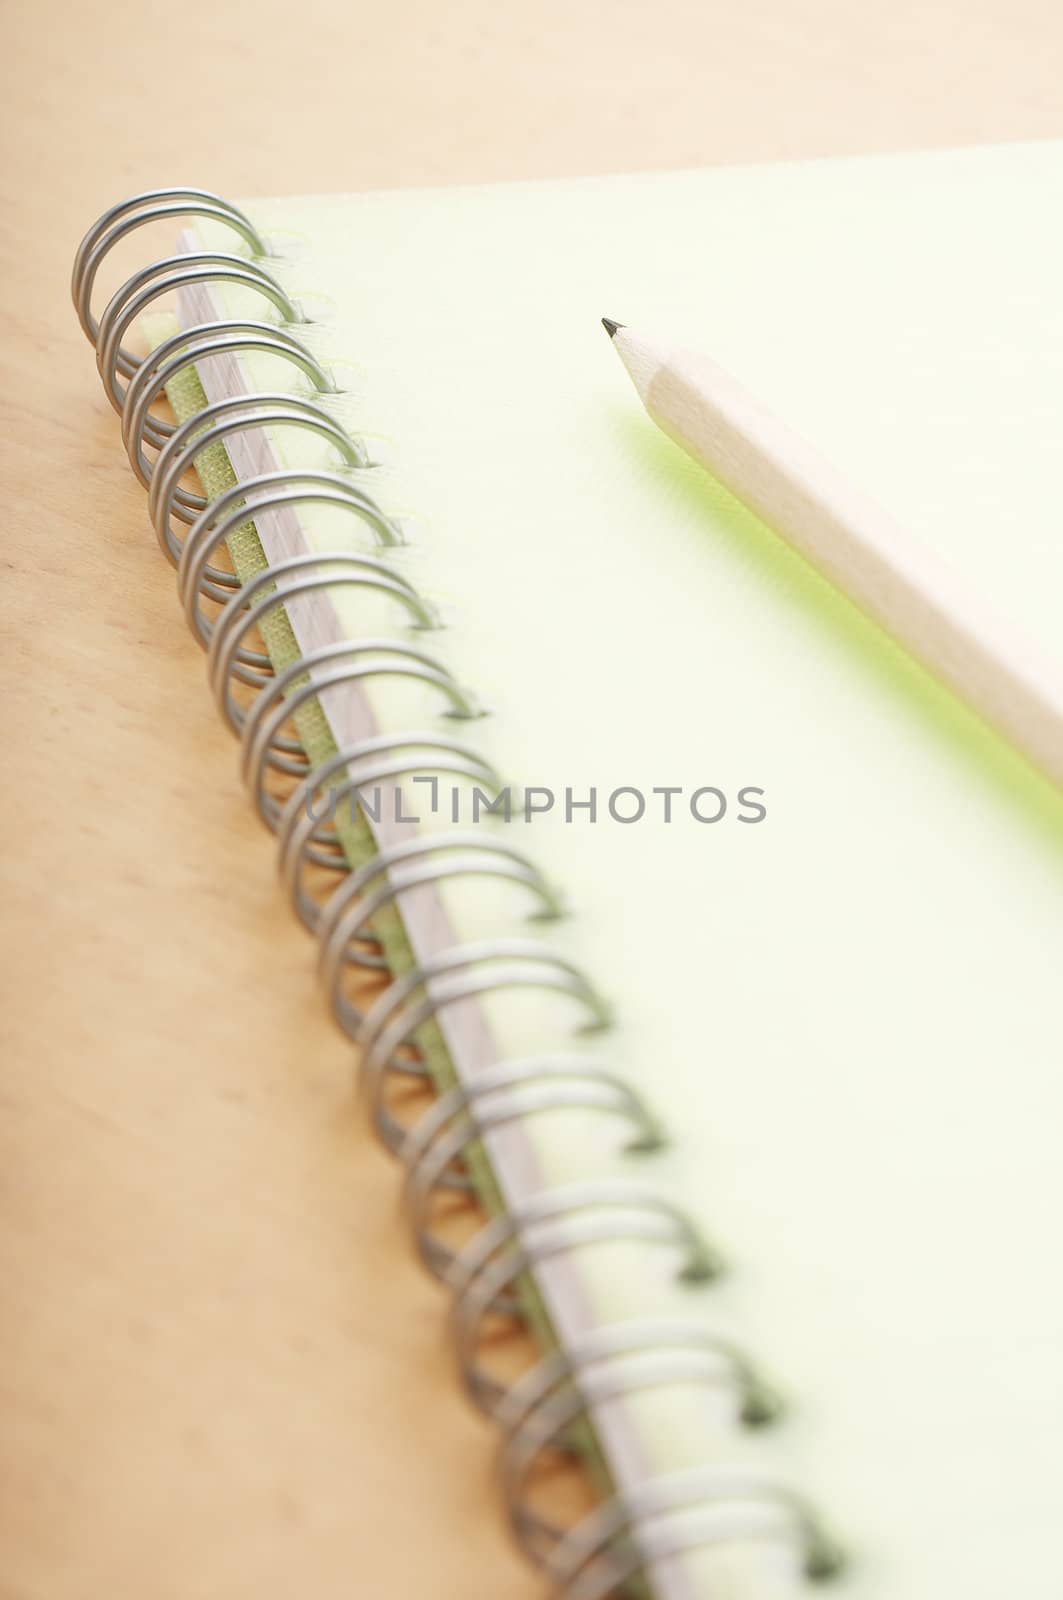 Pencil on the green spiral notebook cover